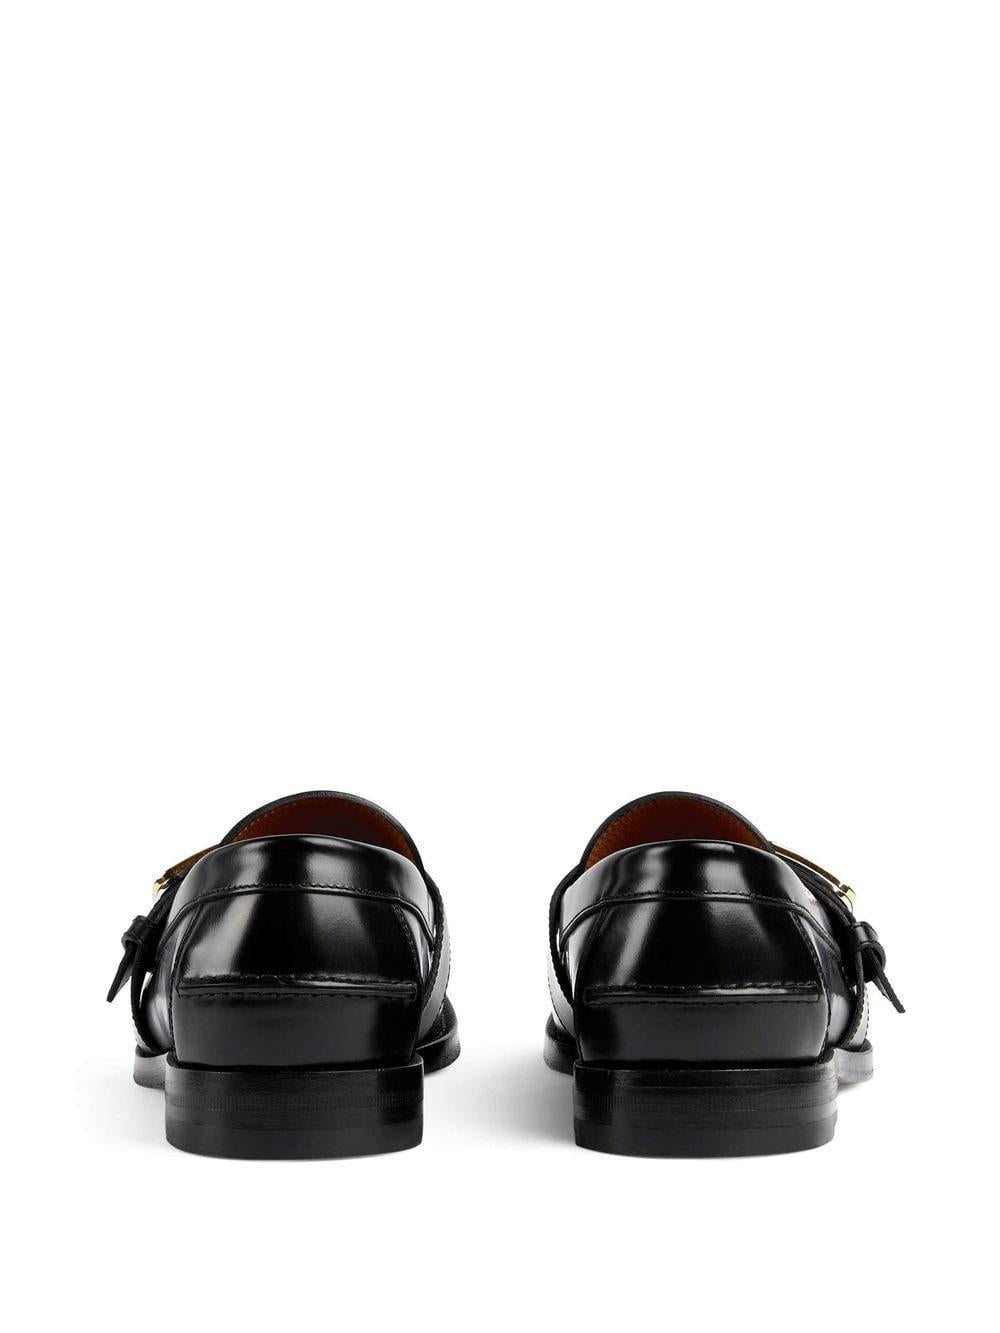 GUCCI Black Moccasin Leather Lace-Up Shoes for Men